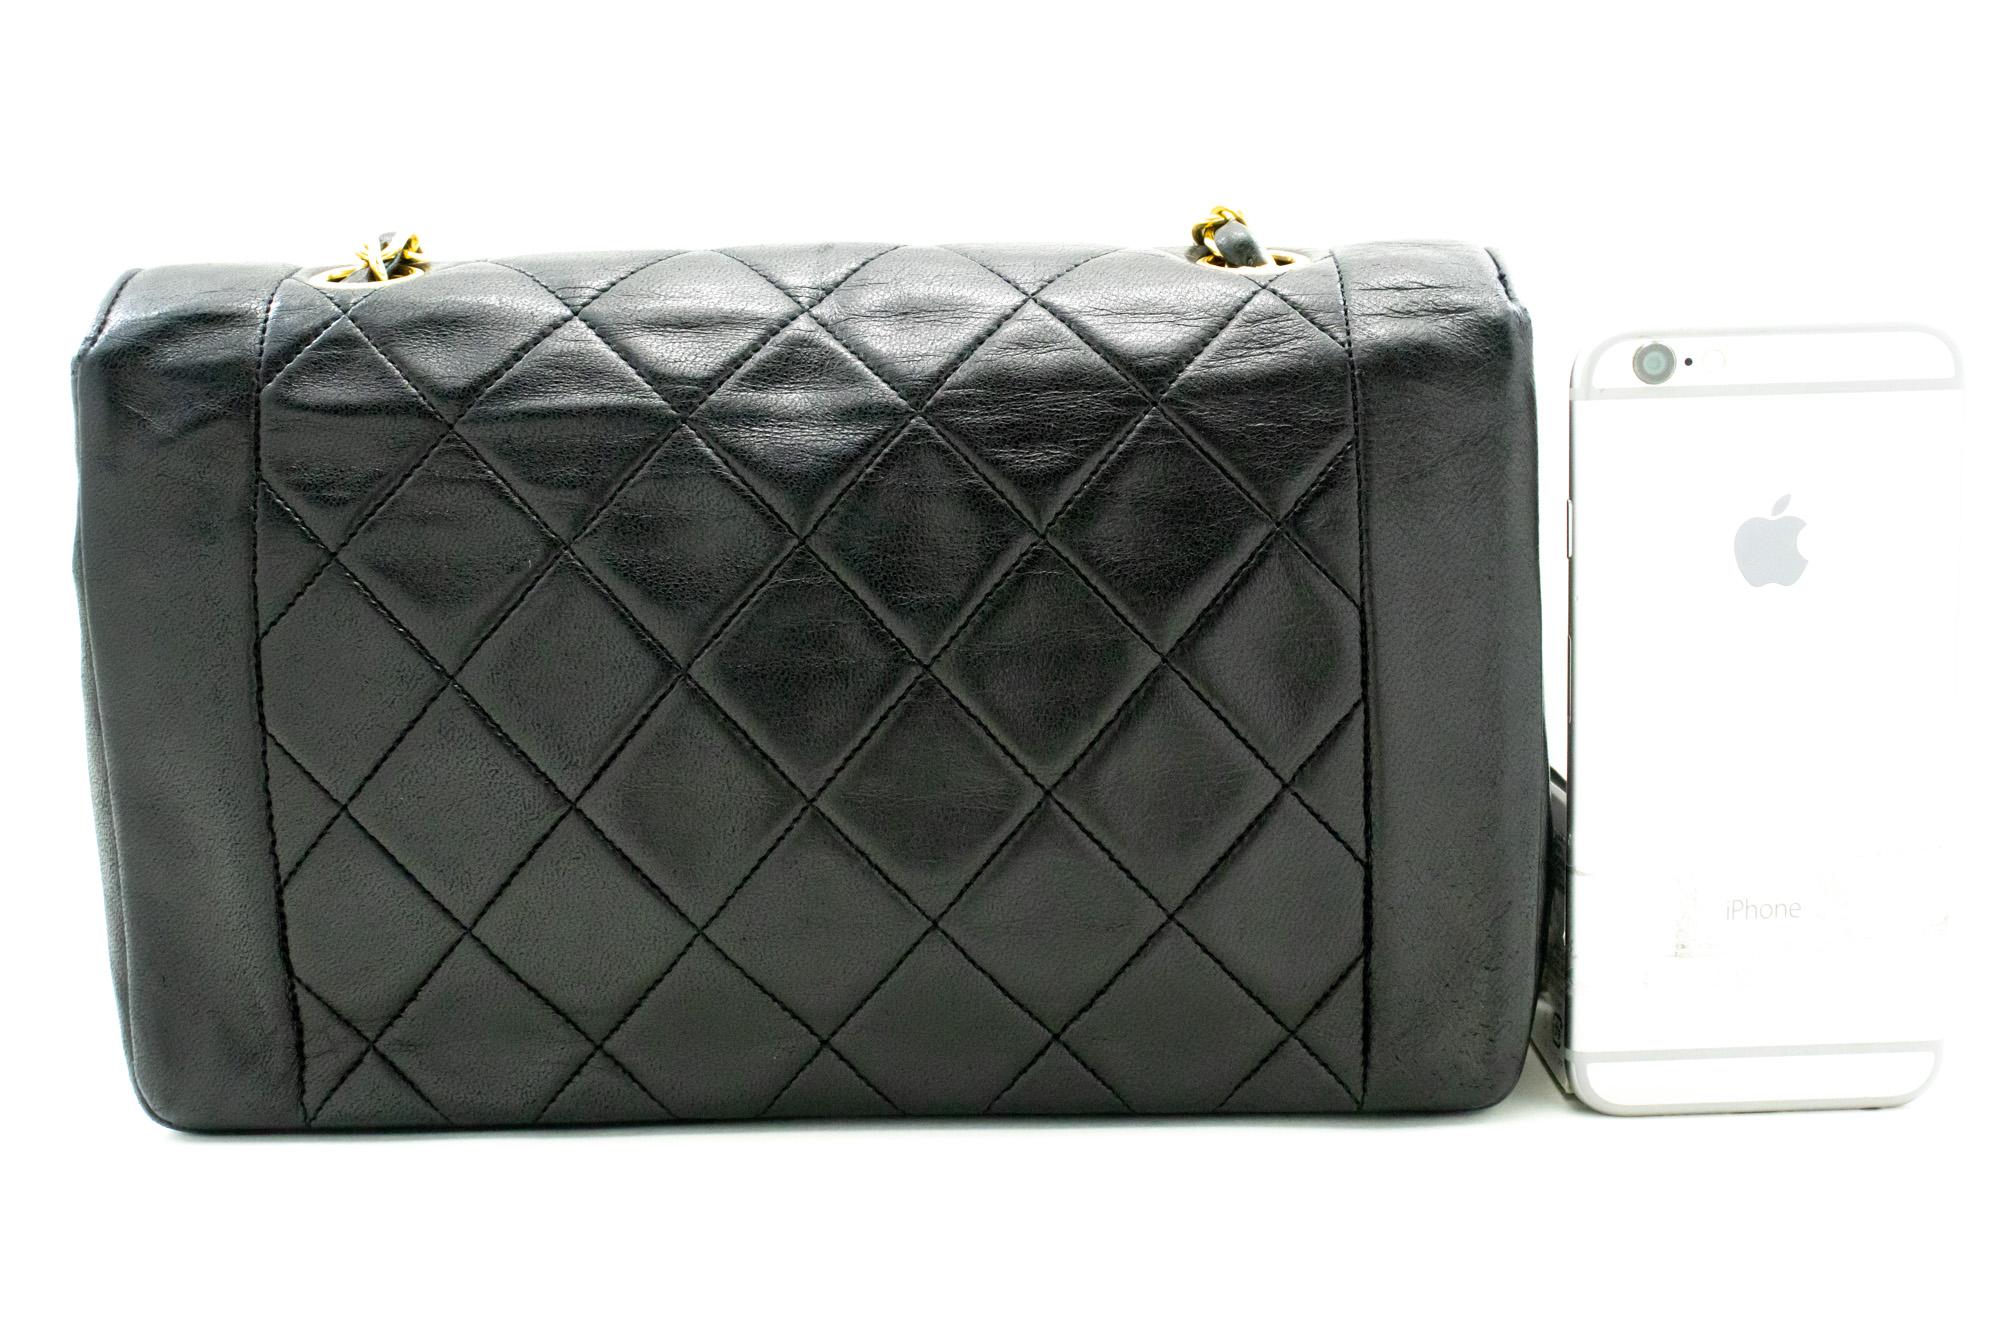 CHANEL Vintage Medium Chain Shoulder Bag Lambskin Black Quilted In Good Condition For Sale In Takamatsu-shi, JP